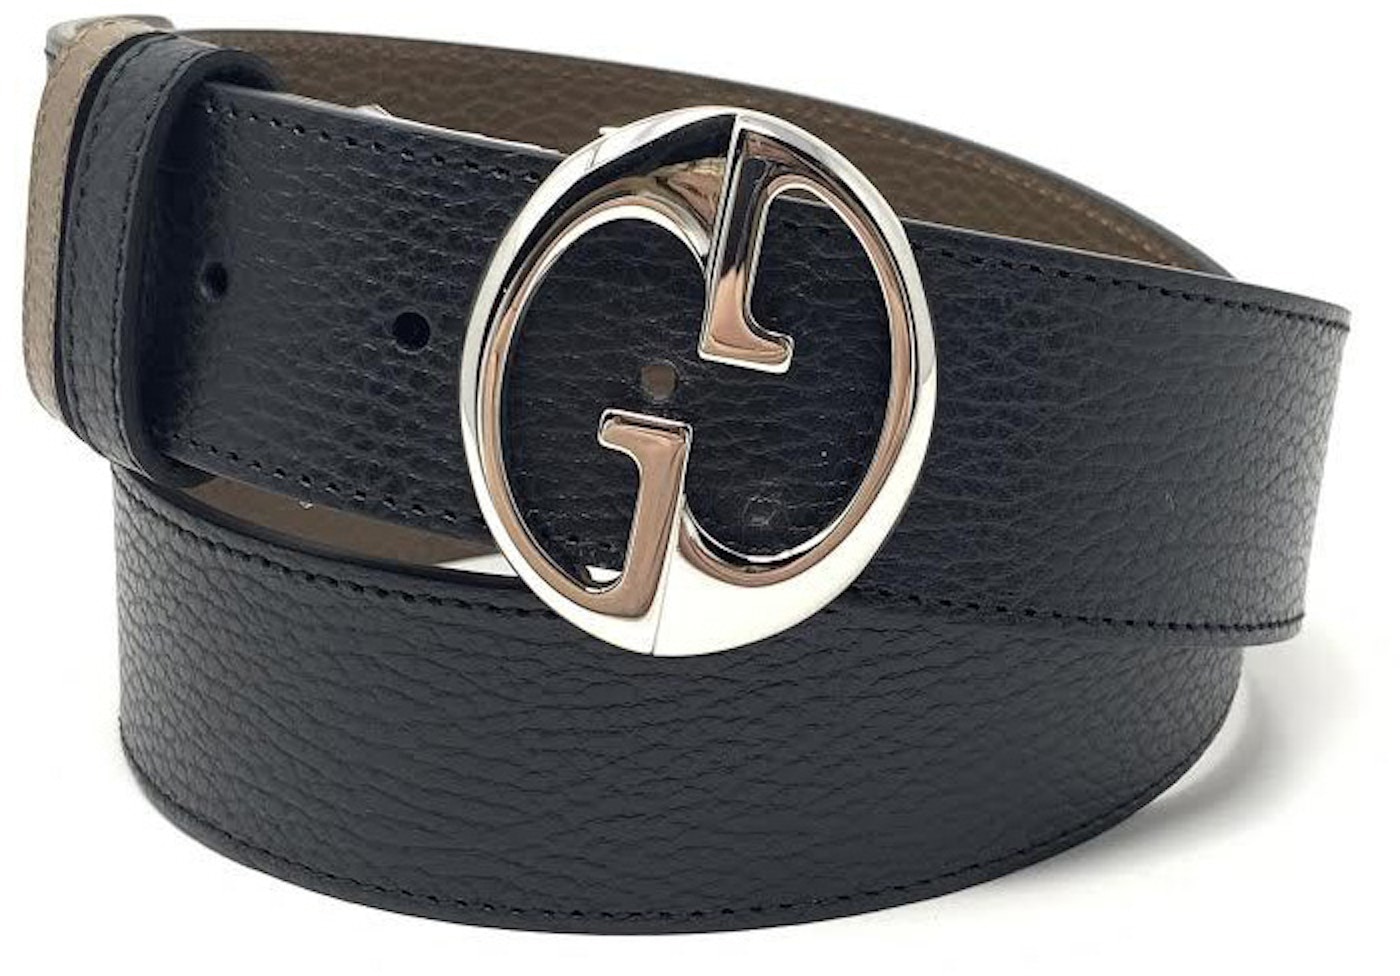 Gucci Reversible Belt Black/Brown in with Silver-tone